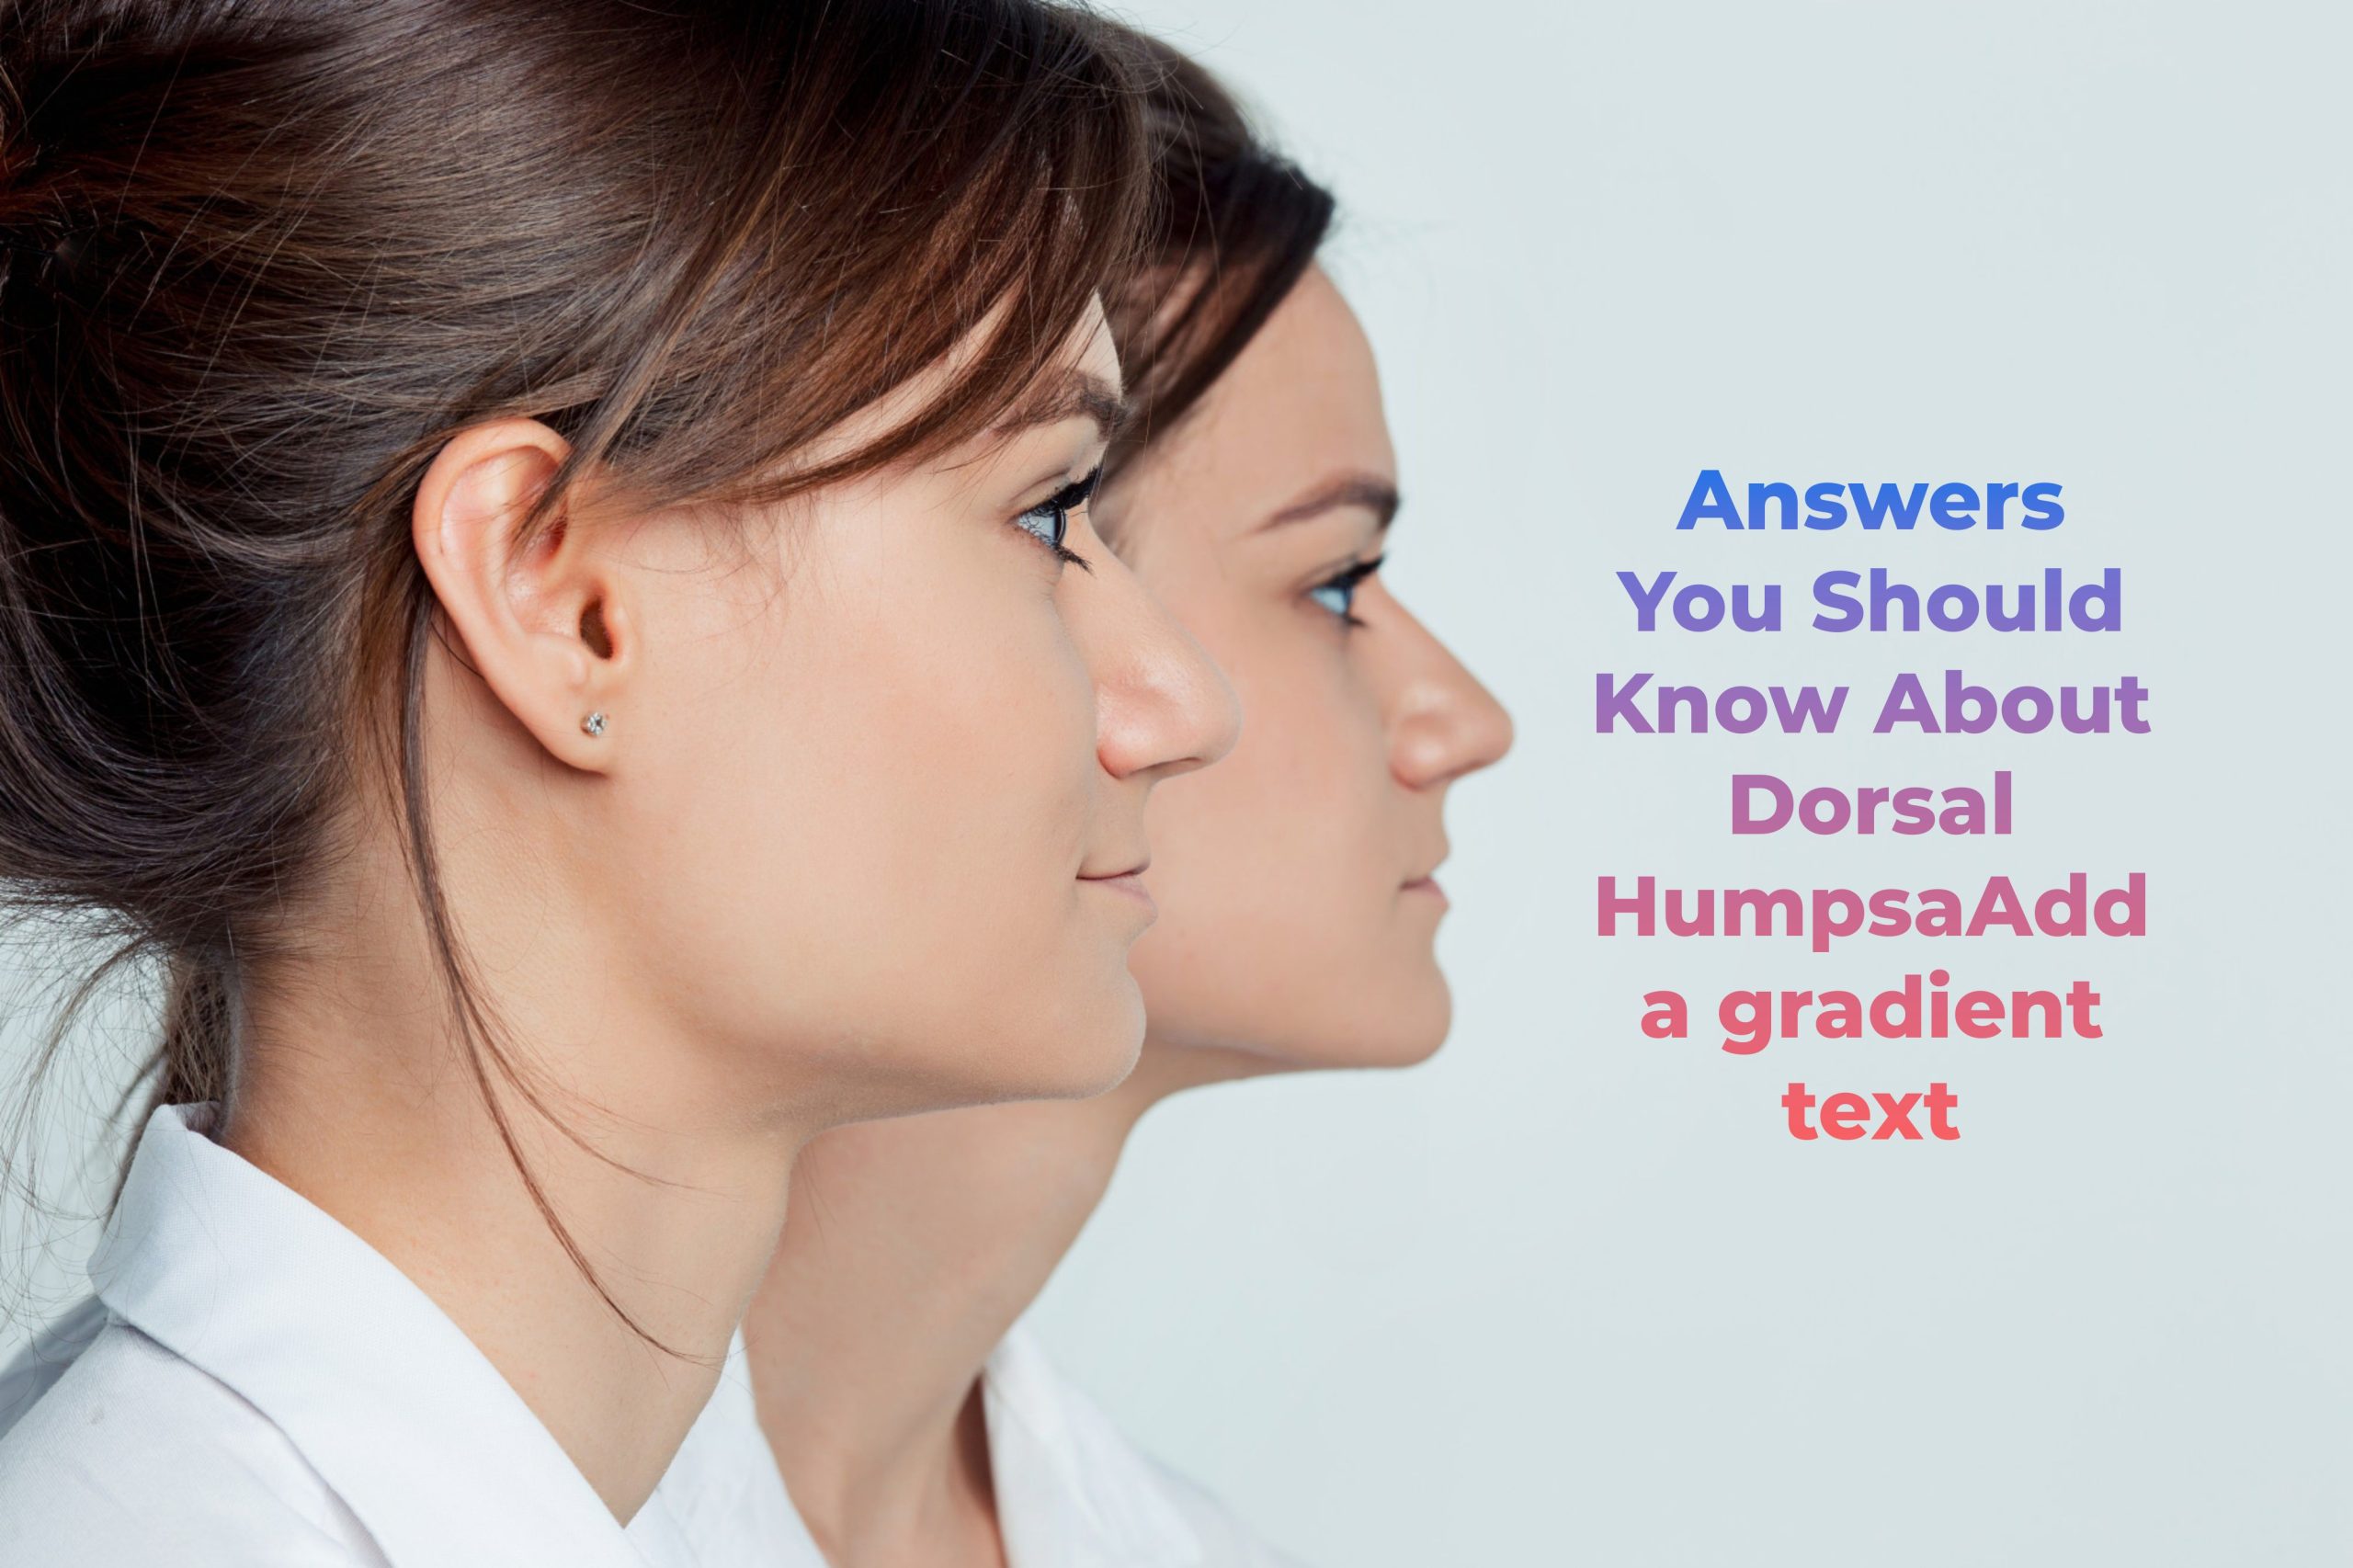 Answers You Should Know About Dorsal Humps